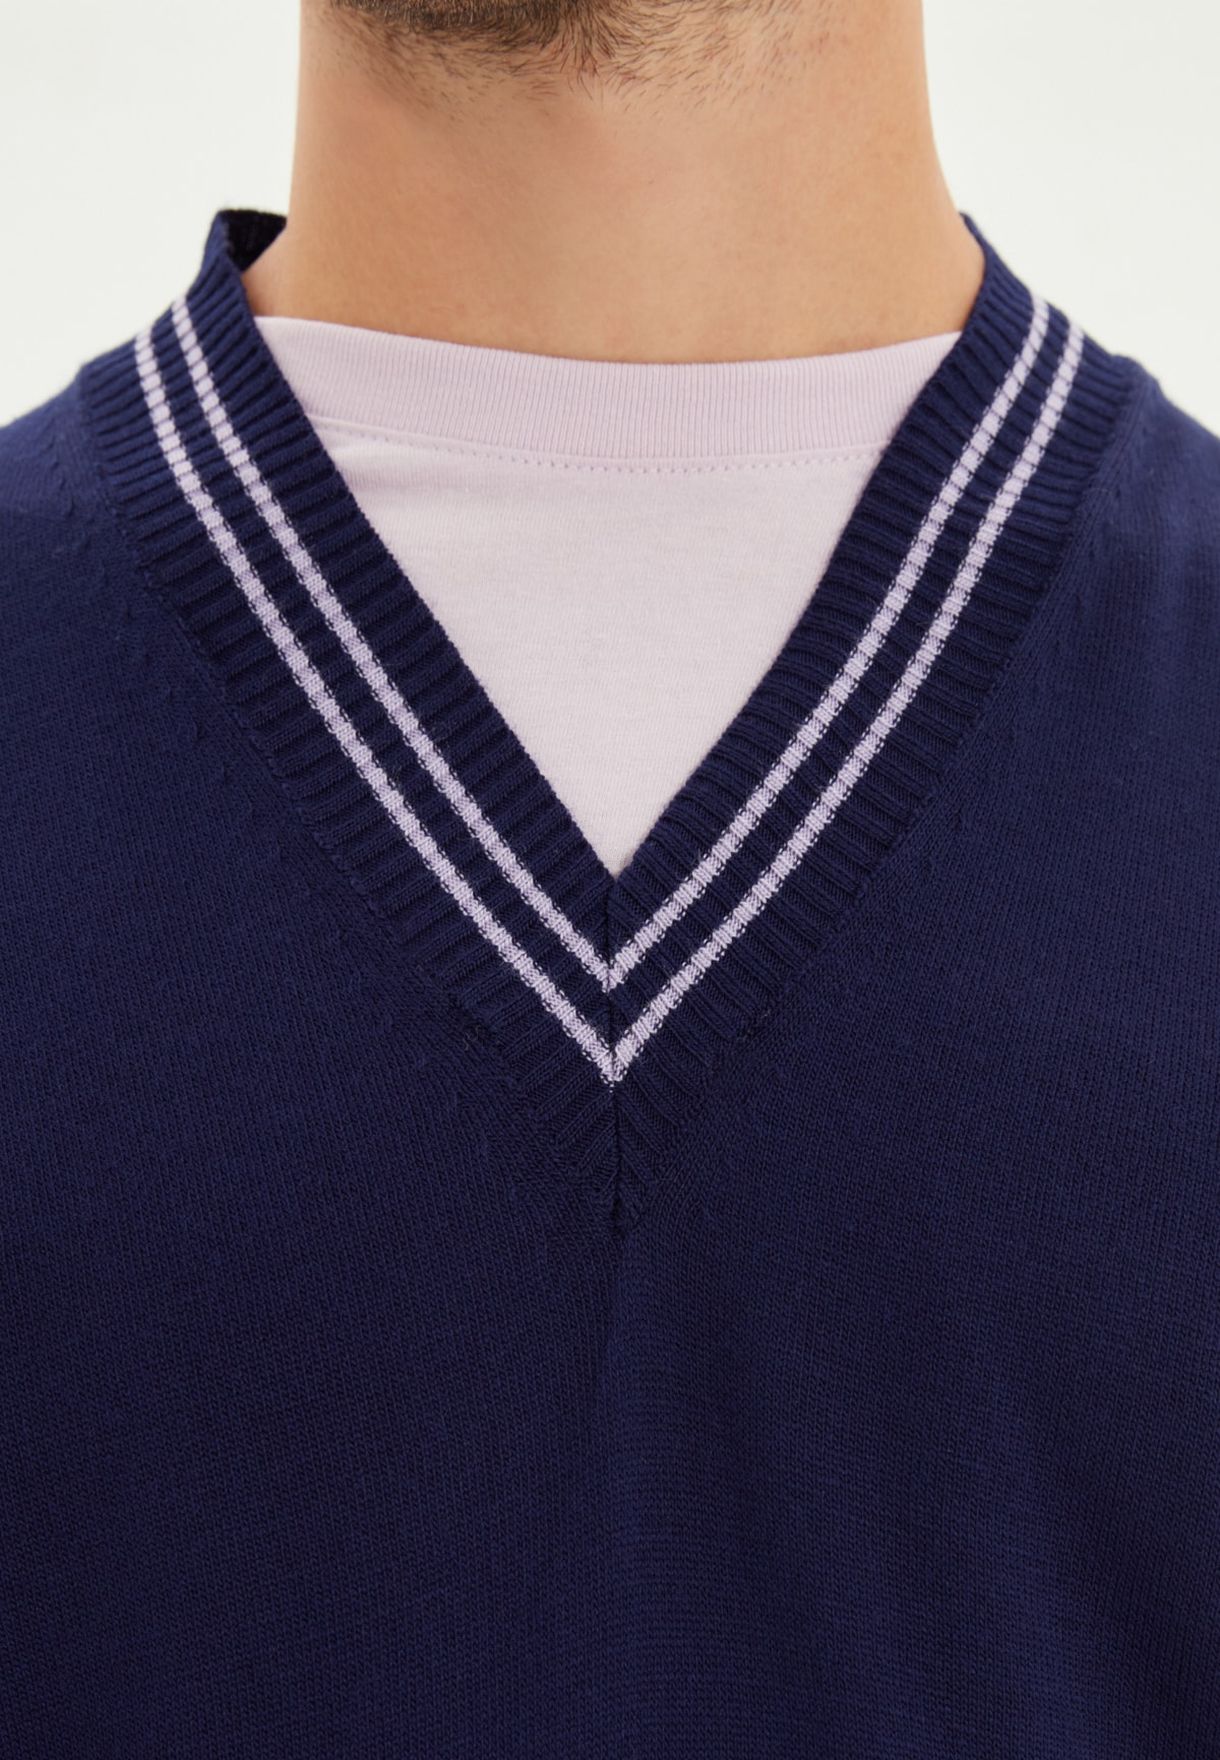 Line Detail Knitted Sweater